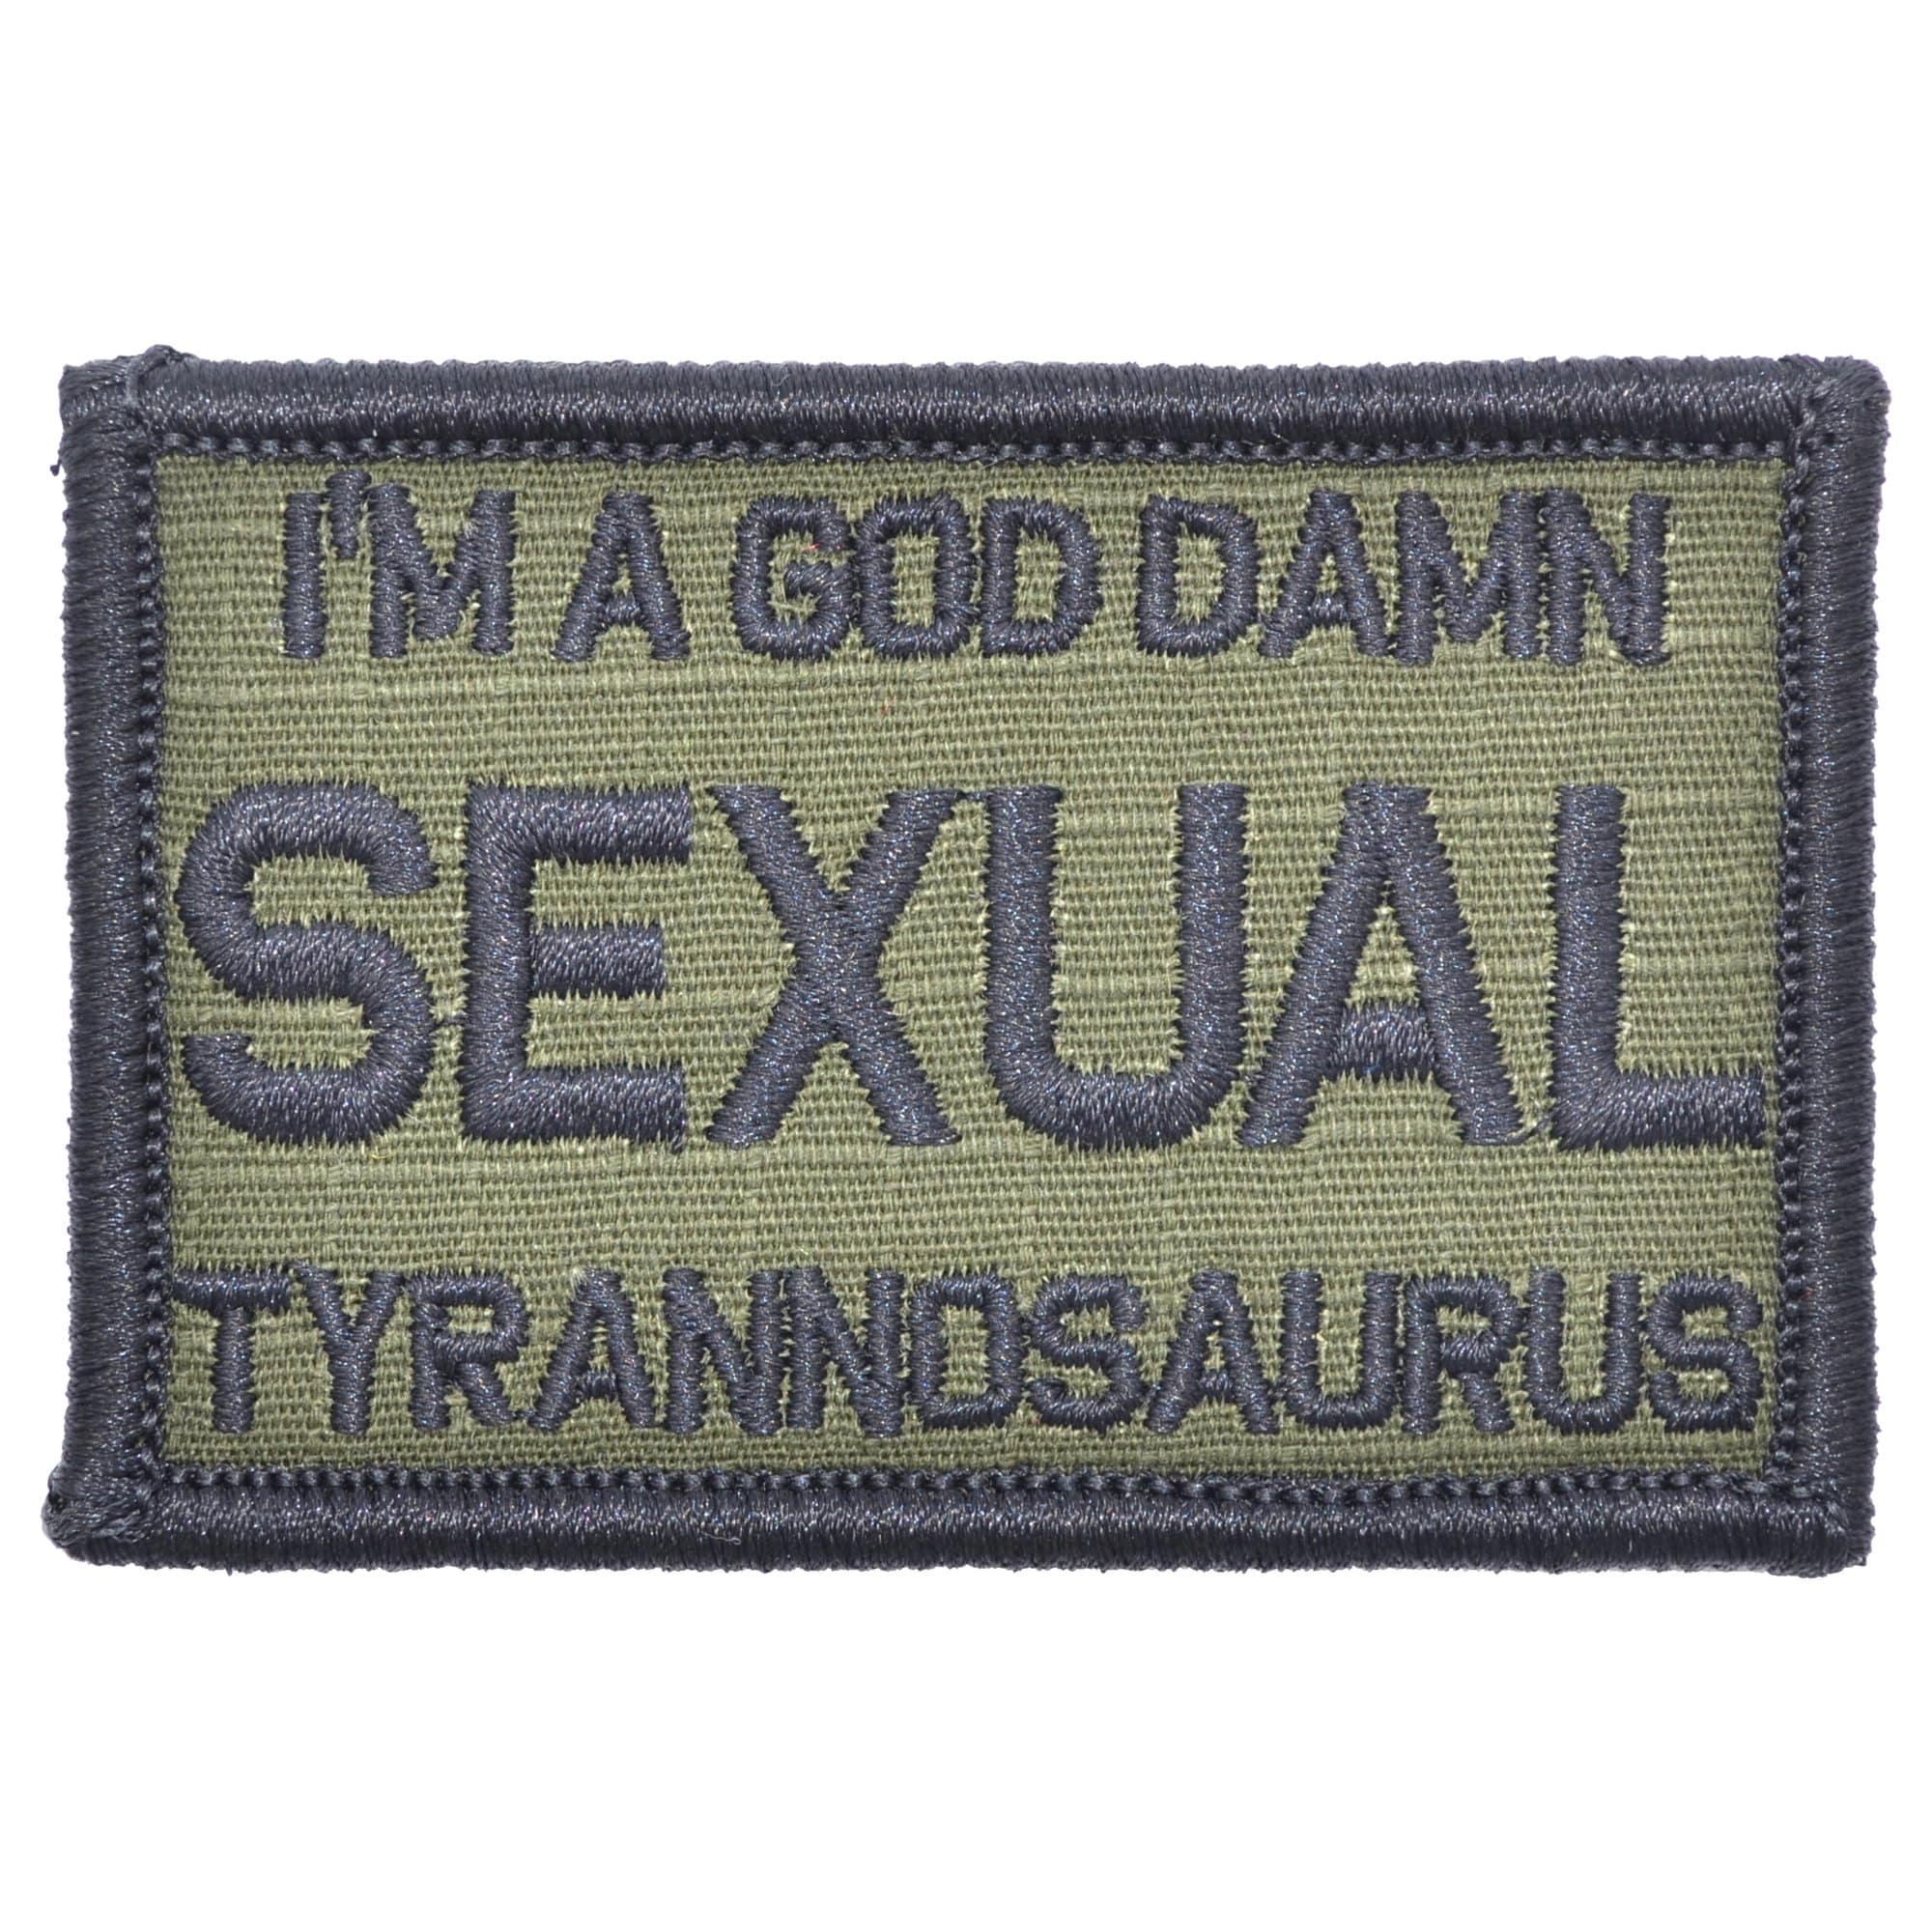 Tactical Gear Junkie Patches Olive Drab I'm a God Damn Sexual Tyrannosaurus - 2x3 Patch